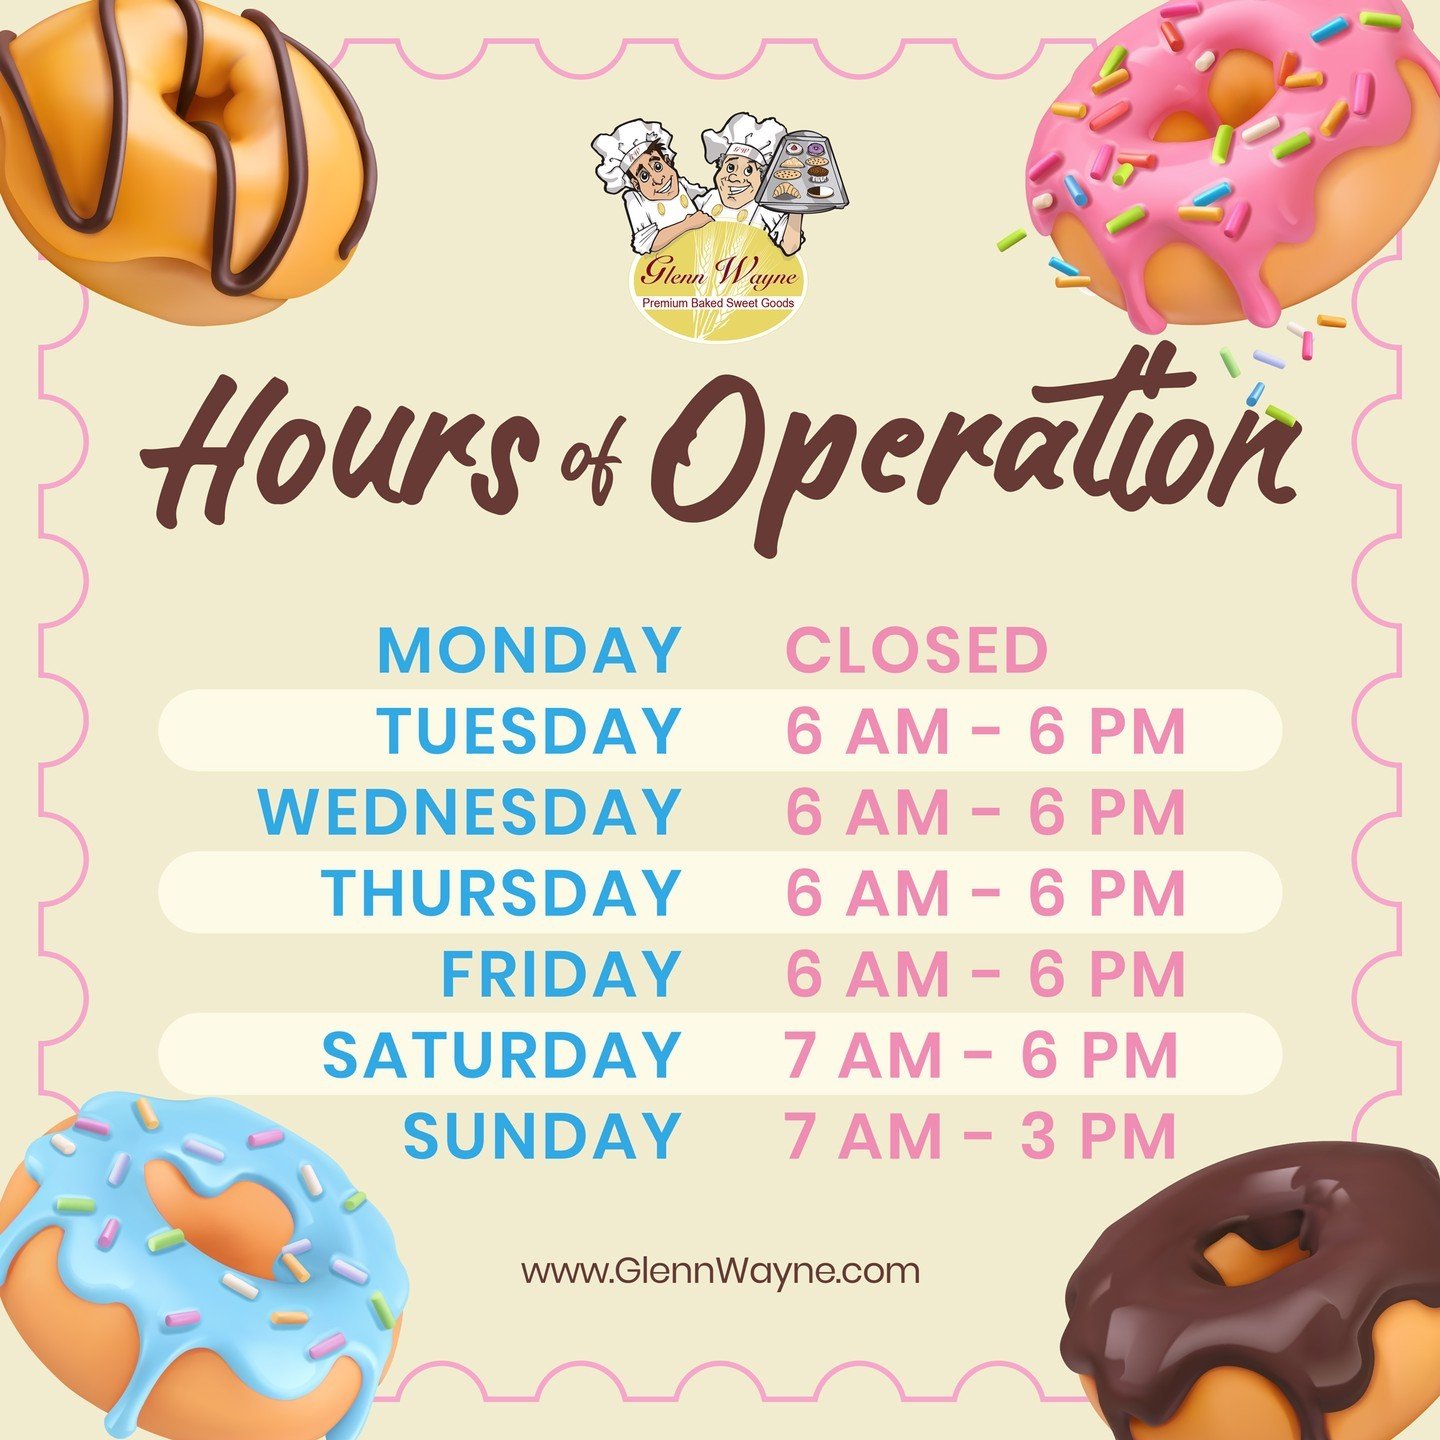 🕒🍩📅 Just a quick reminder! Here are our Hours of Operation at Glenn Wayne Bakery. Come visit us!

📍 Bohemia, NY
📞 631-256-5140
📞 631-319-6266
🌐 www.GlennWayne.com

#Bakery #GlennWayneBakery #HoursOfOperation #LongIsland #LongIslandEats #NewYor